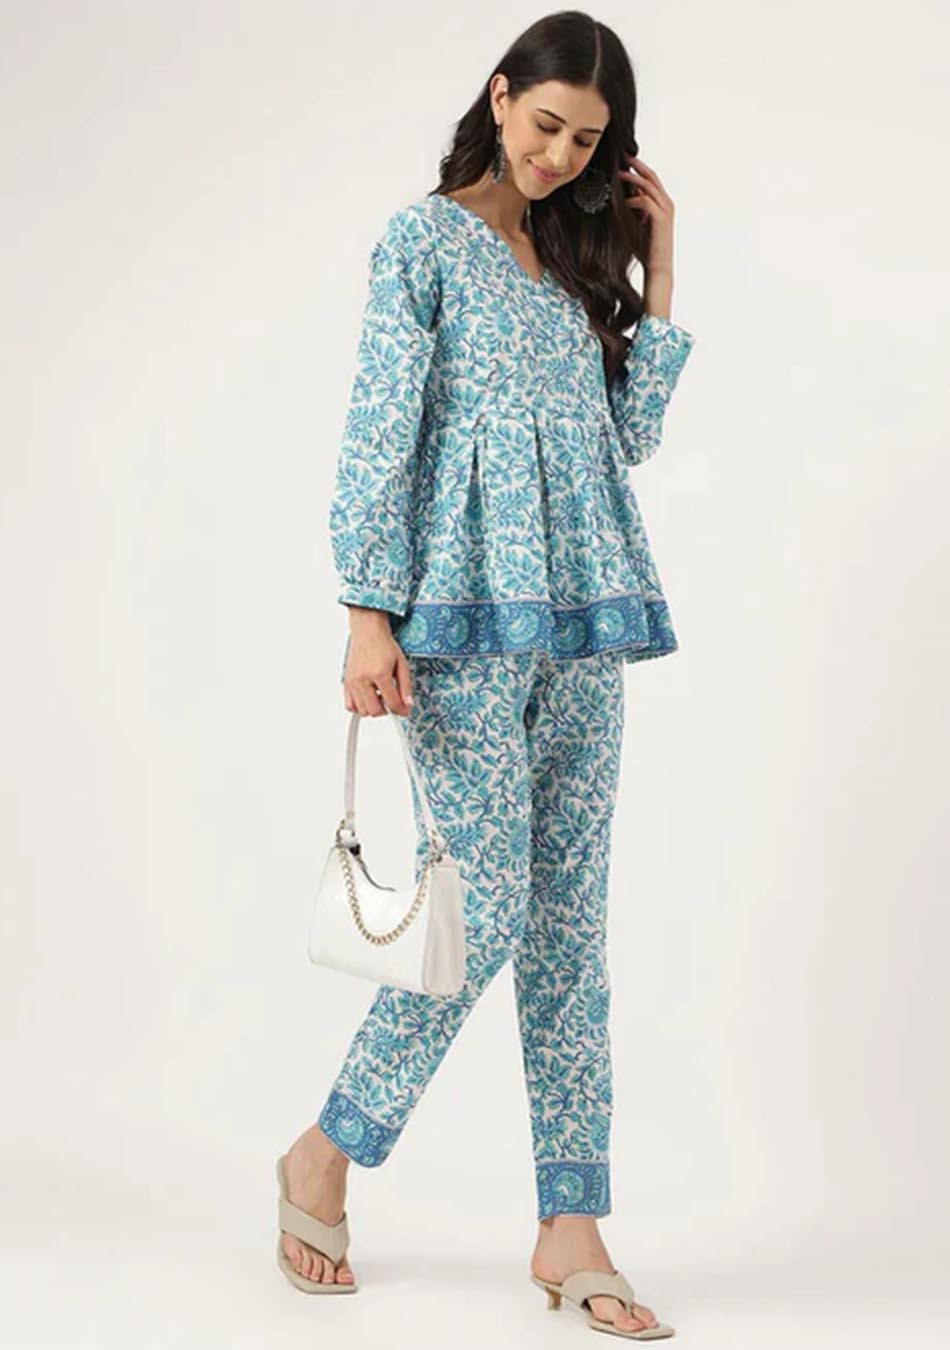 White Floral Printed Cotton Peplum Top Pant Co-ords Set